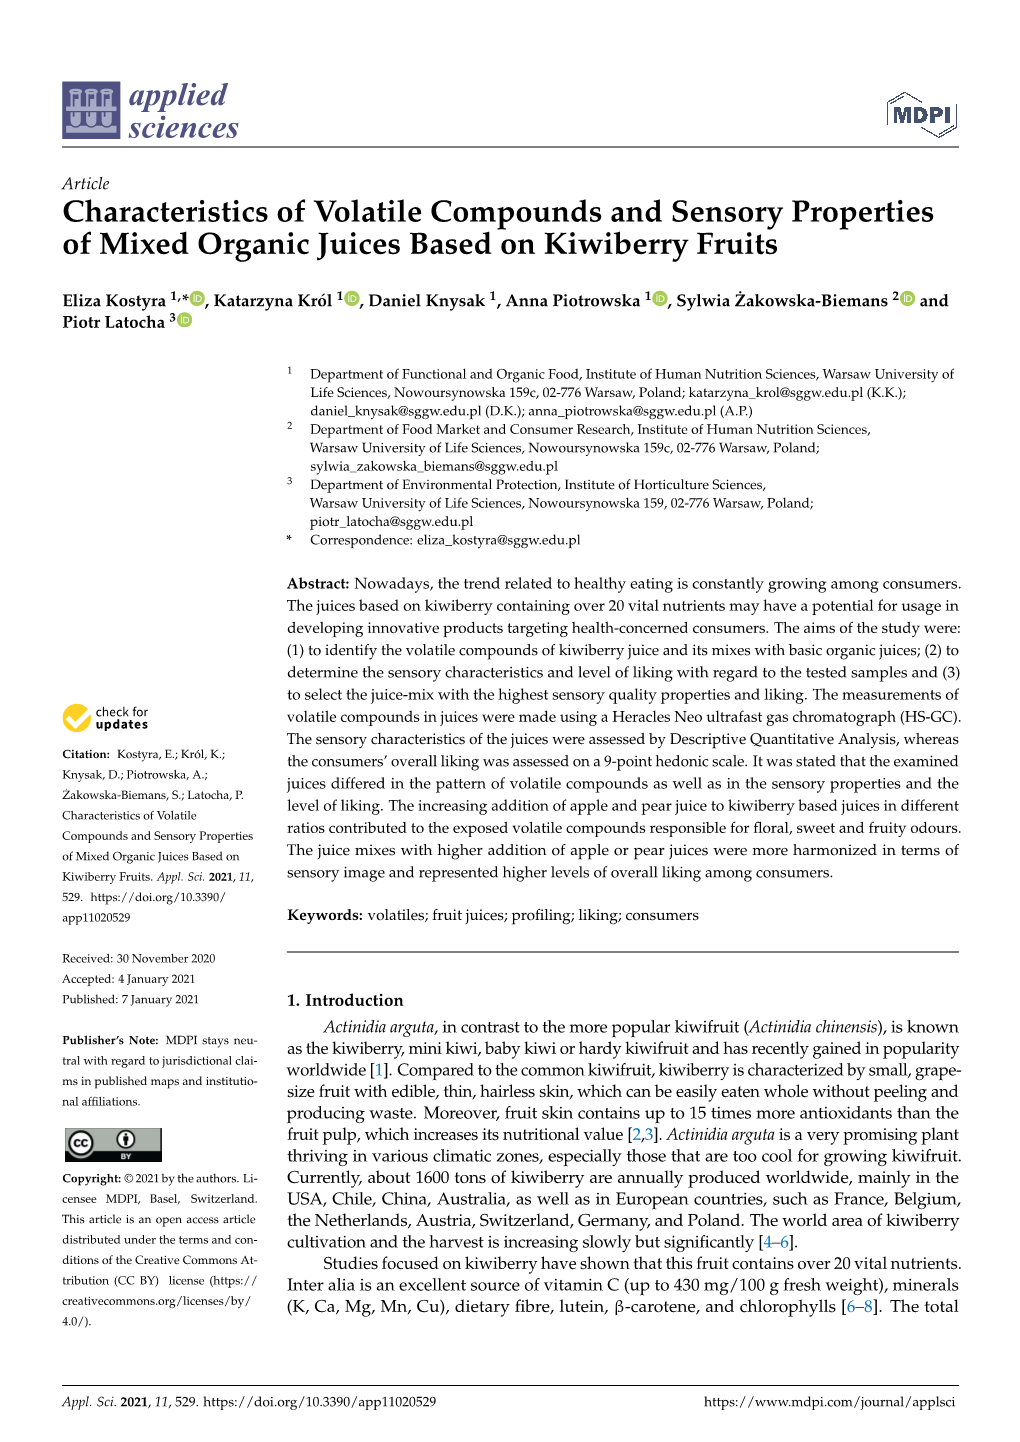 Characteristics of Volatile Compounds and Sensory Properties of Mixed Organic Juices Based on Kiwiberry Fruits